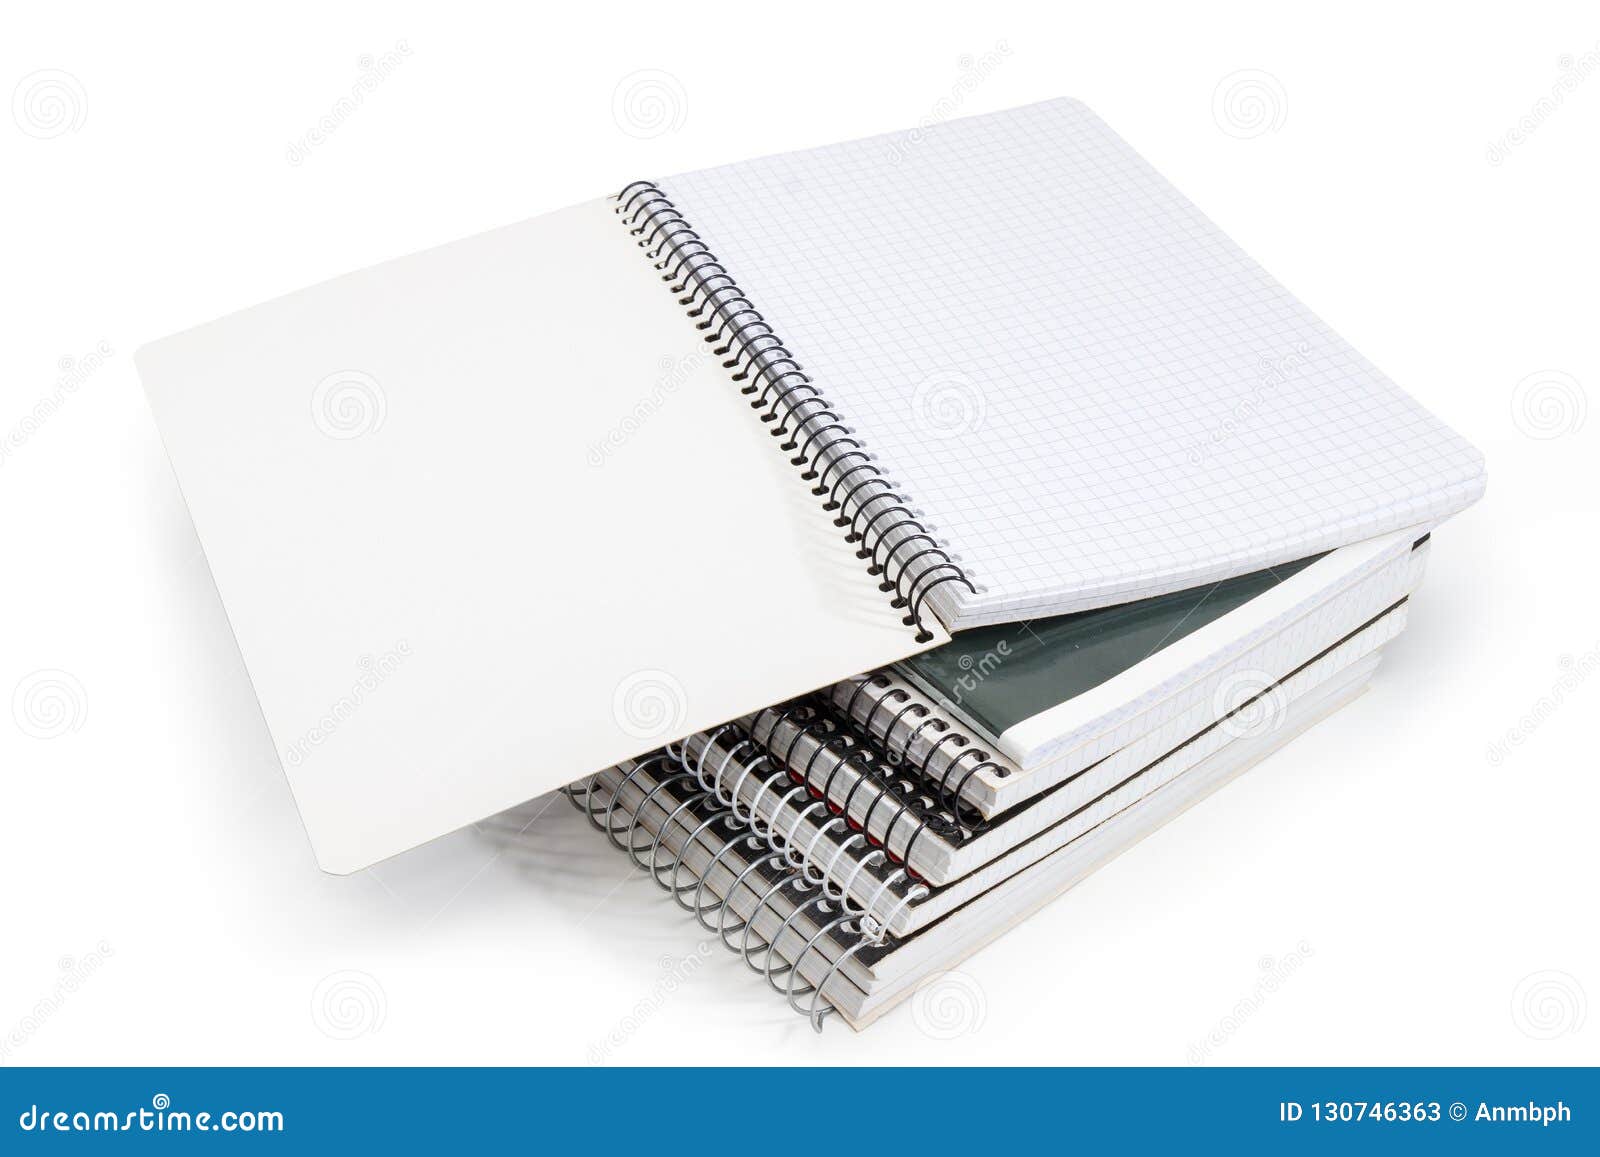 https://thumbs.dreamstime.com/z/open-exercise-book-stack-other-books-blank-pages-squared-paper-wire-spiral-binding-white-background-130746363.jpg